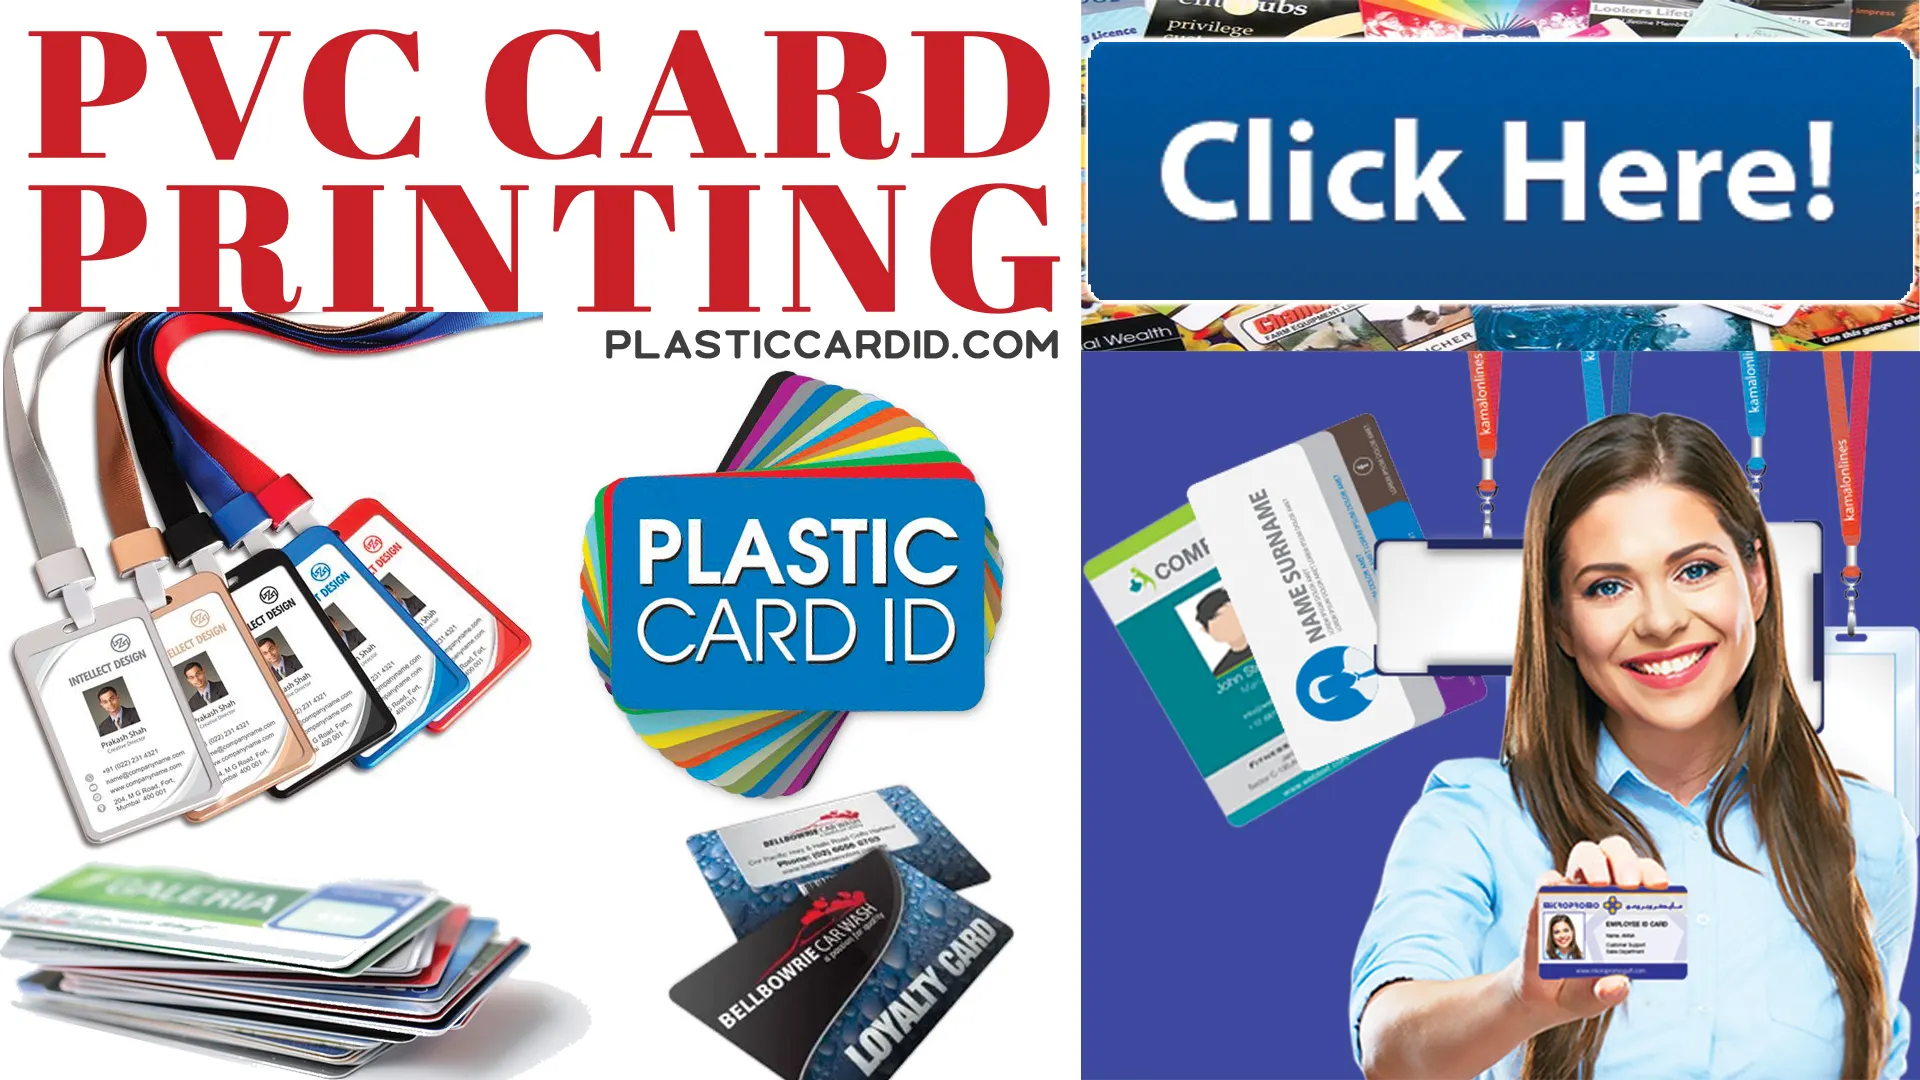 Welcome to the World of Secure Plastic Cards with Smart Chip Technology